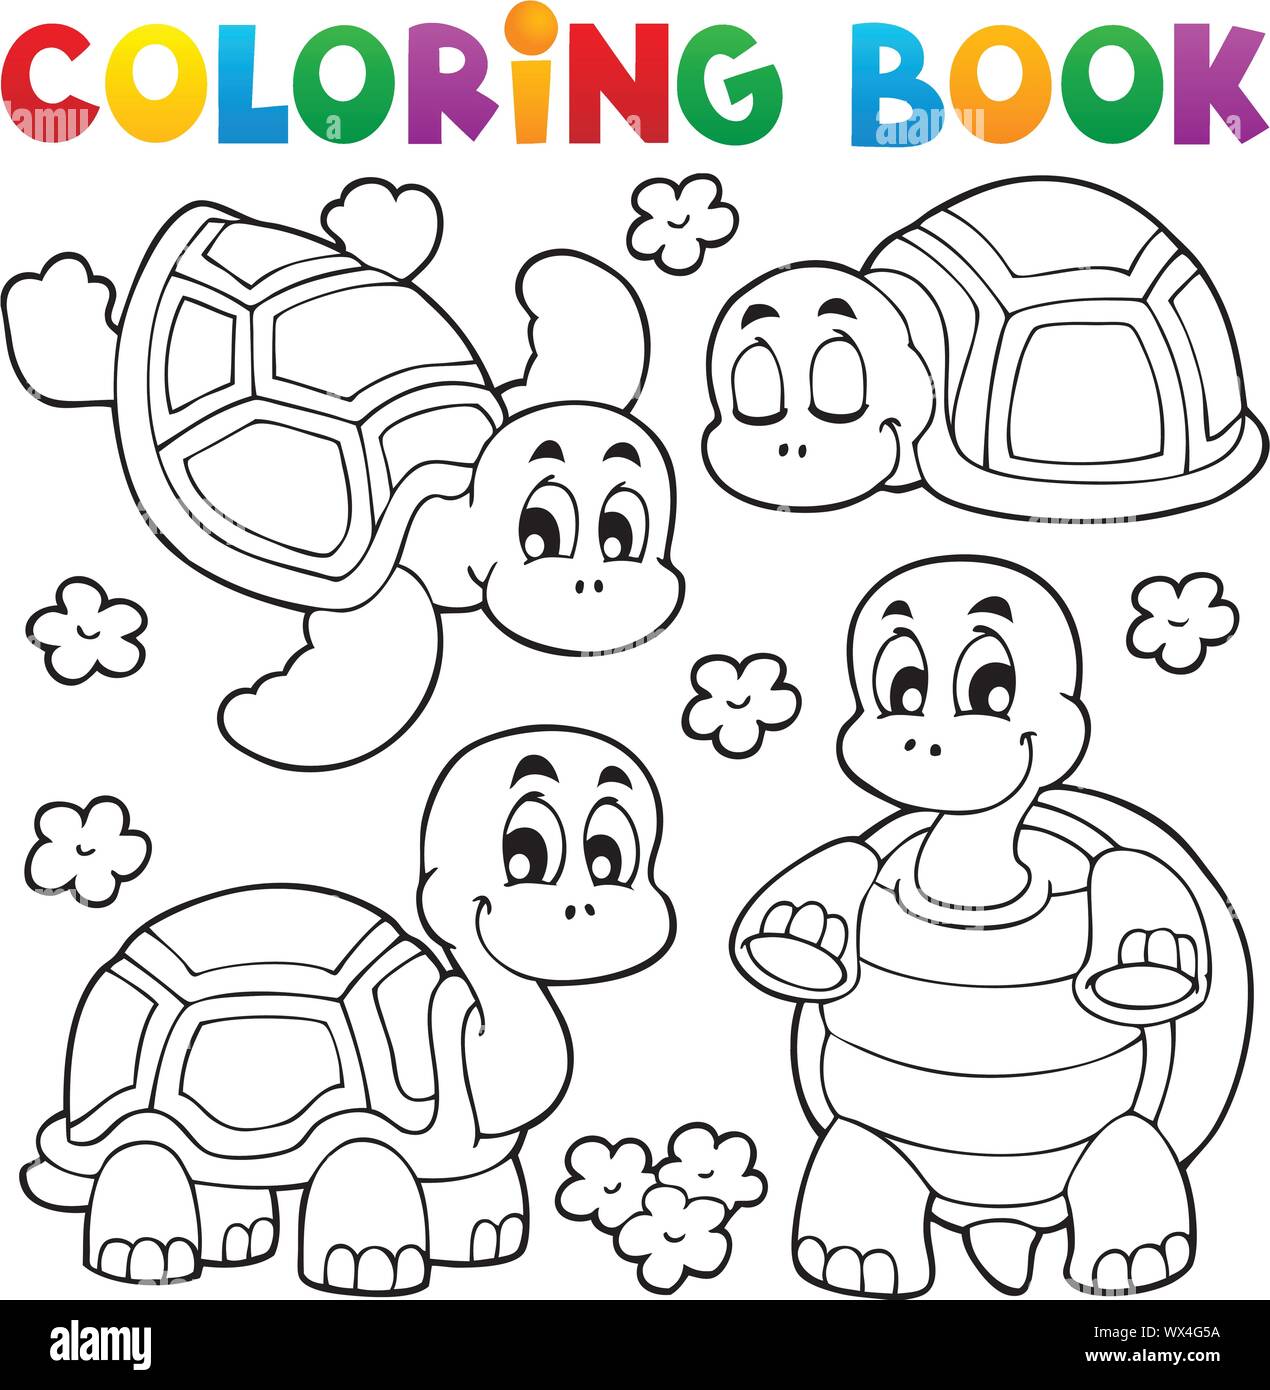 Coloring book turtle theme 1 Stock Vector